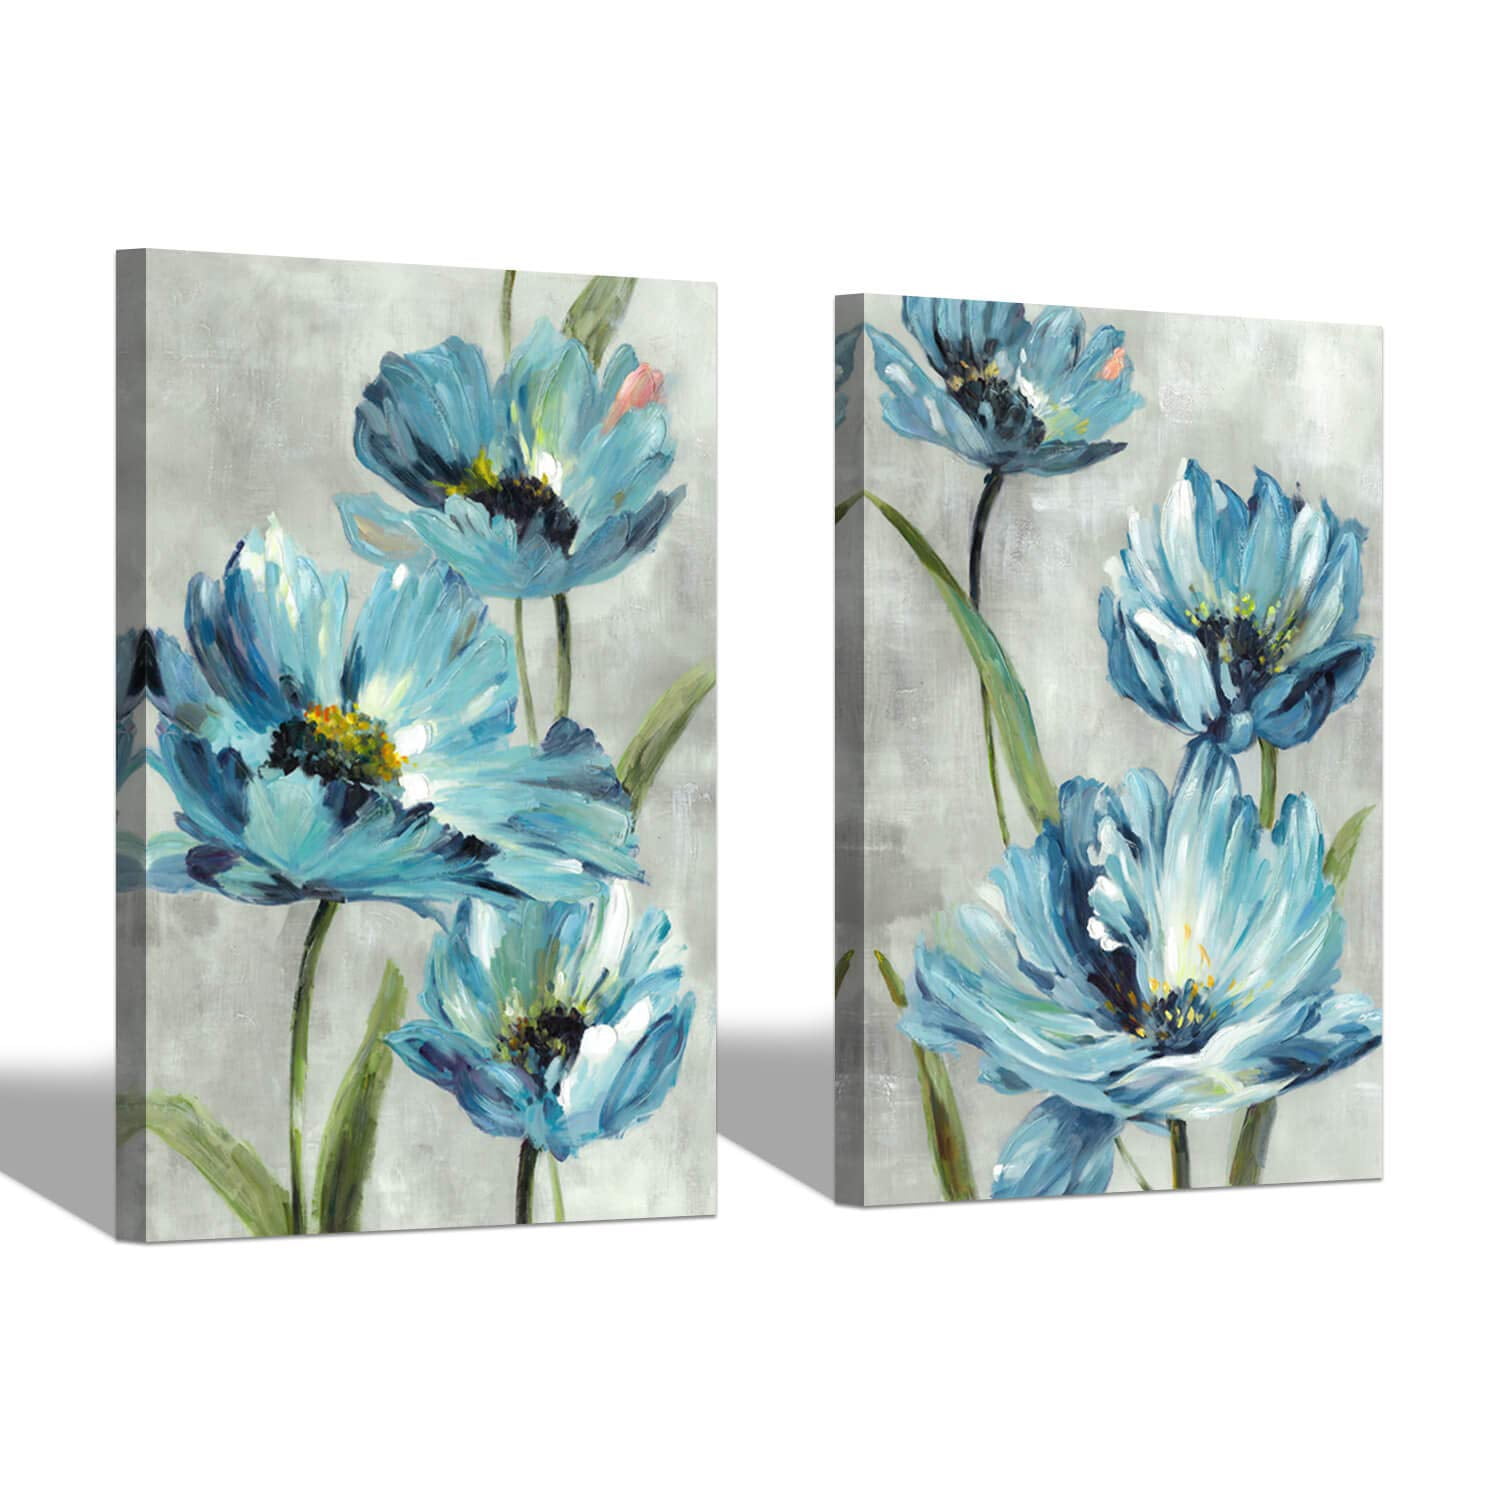 LIVEDITOR Abstract Floral Painting Green & Blue Blooming Flowers ...